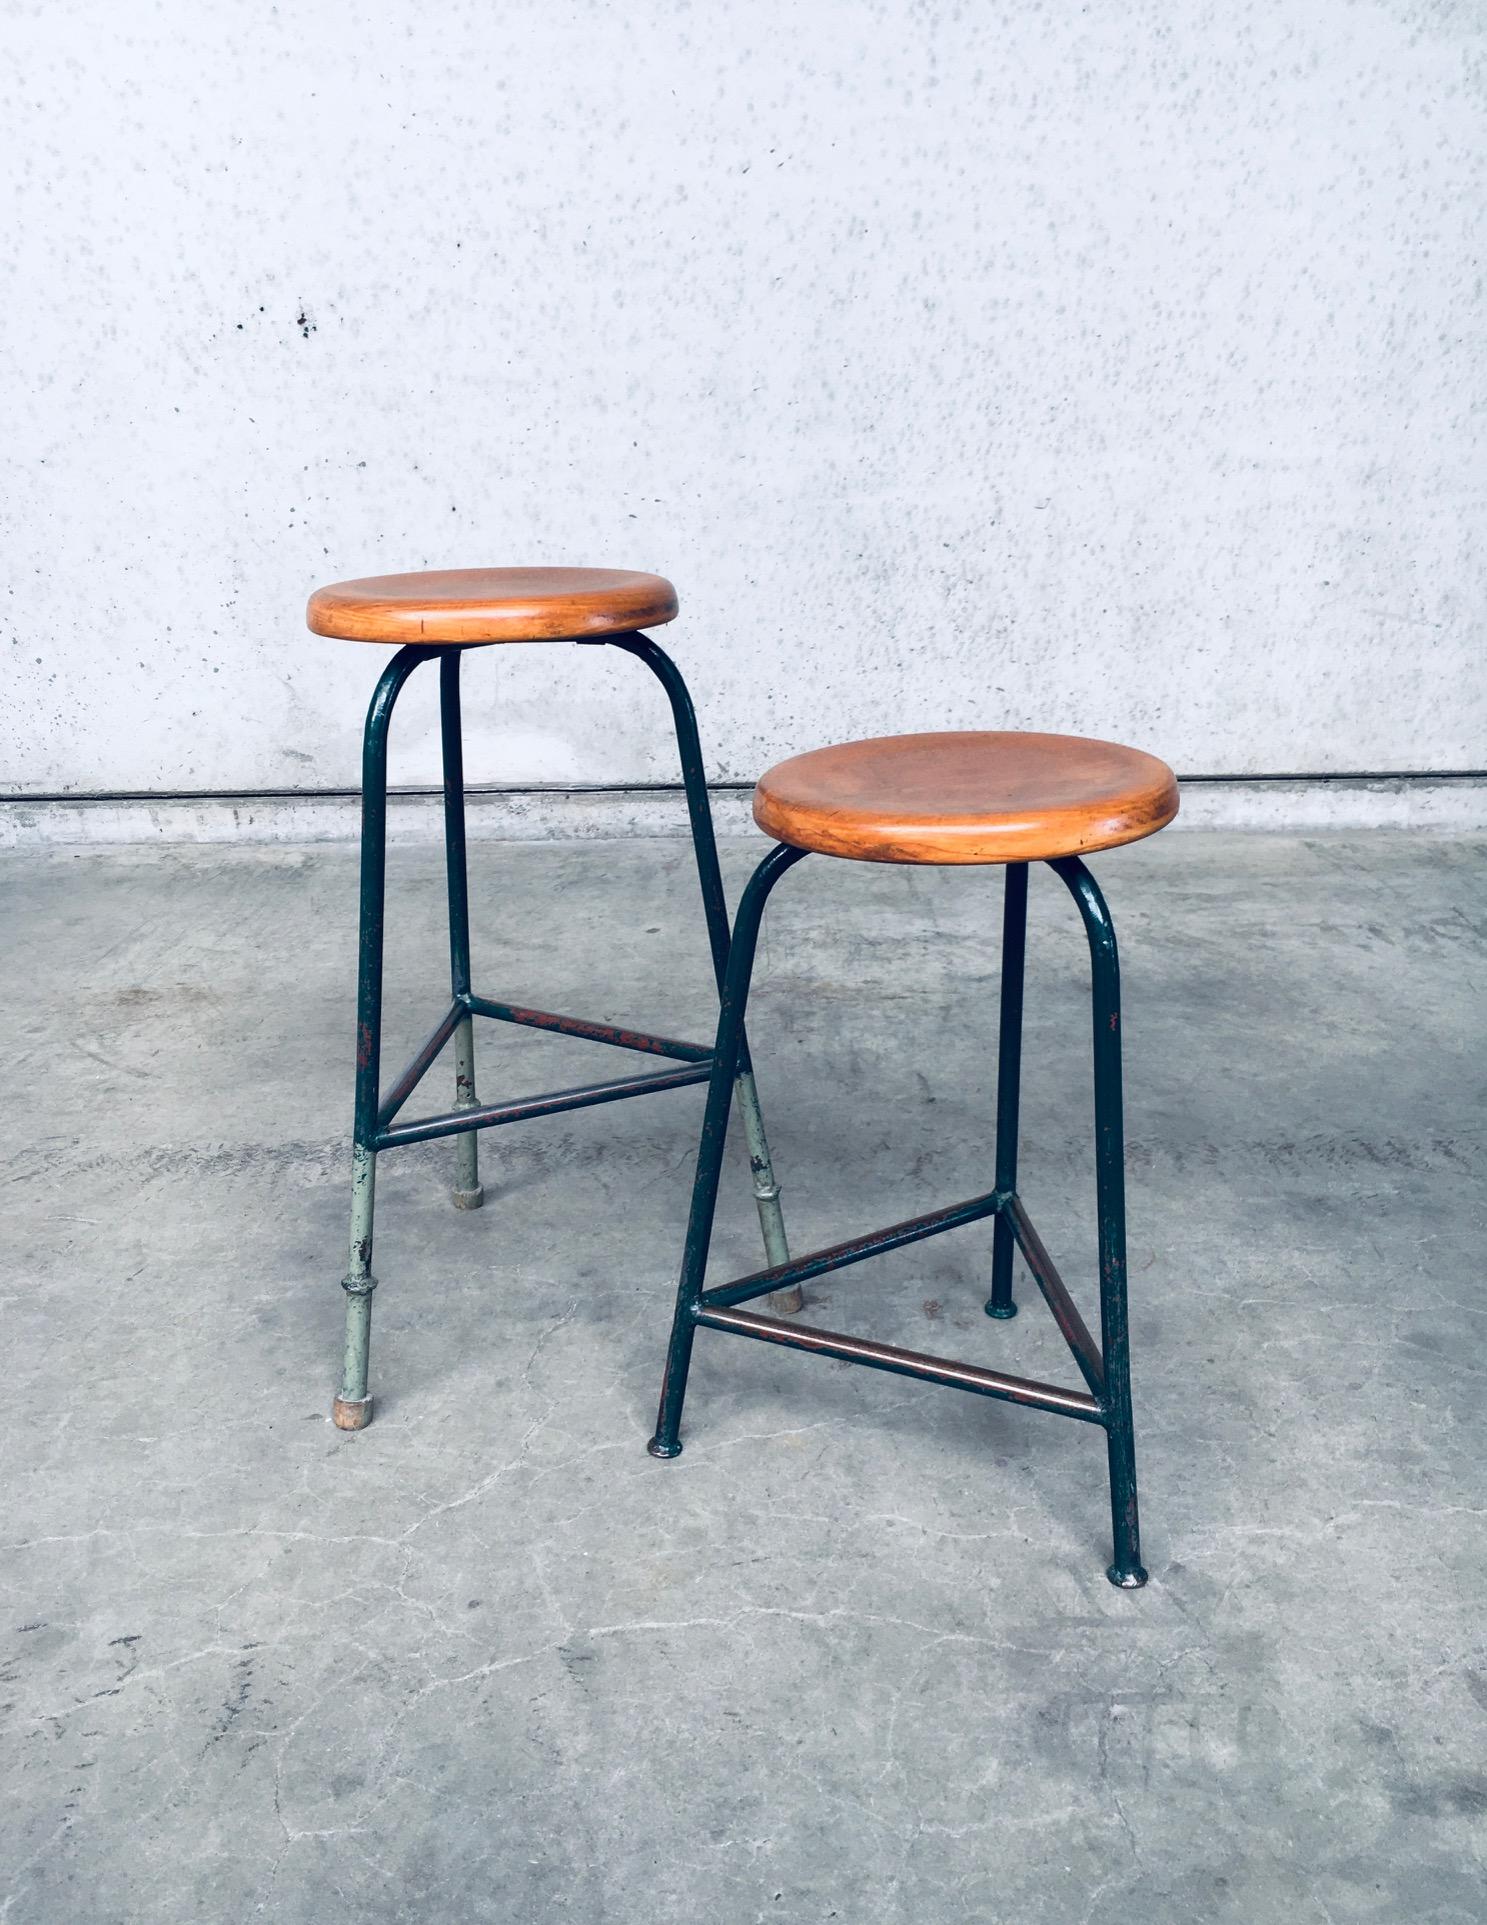 Vintage Industrial Design Tripod Stool set. Made in Belgium, 1950's period. Green lacquered steel tripod base with beech wood round seat. One stool has been altered to a higher seat, which you can see at the bottom of the high model where the green